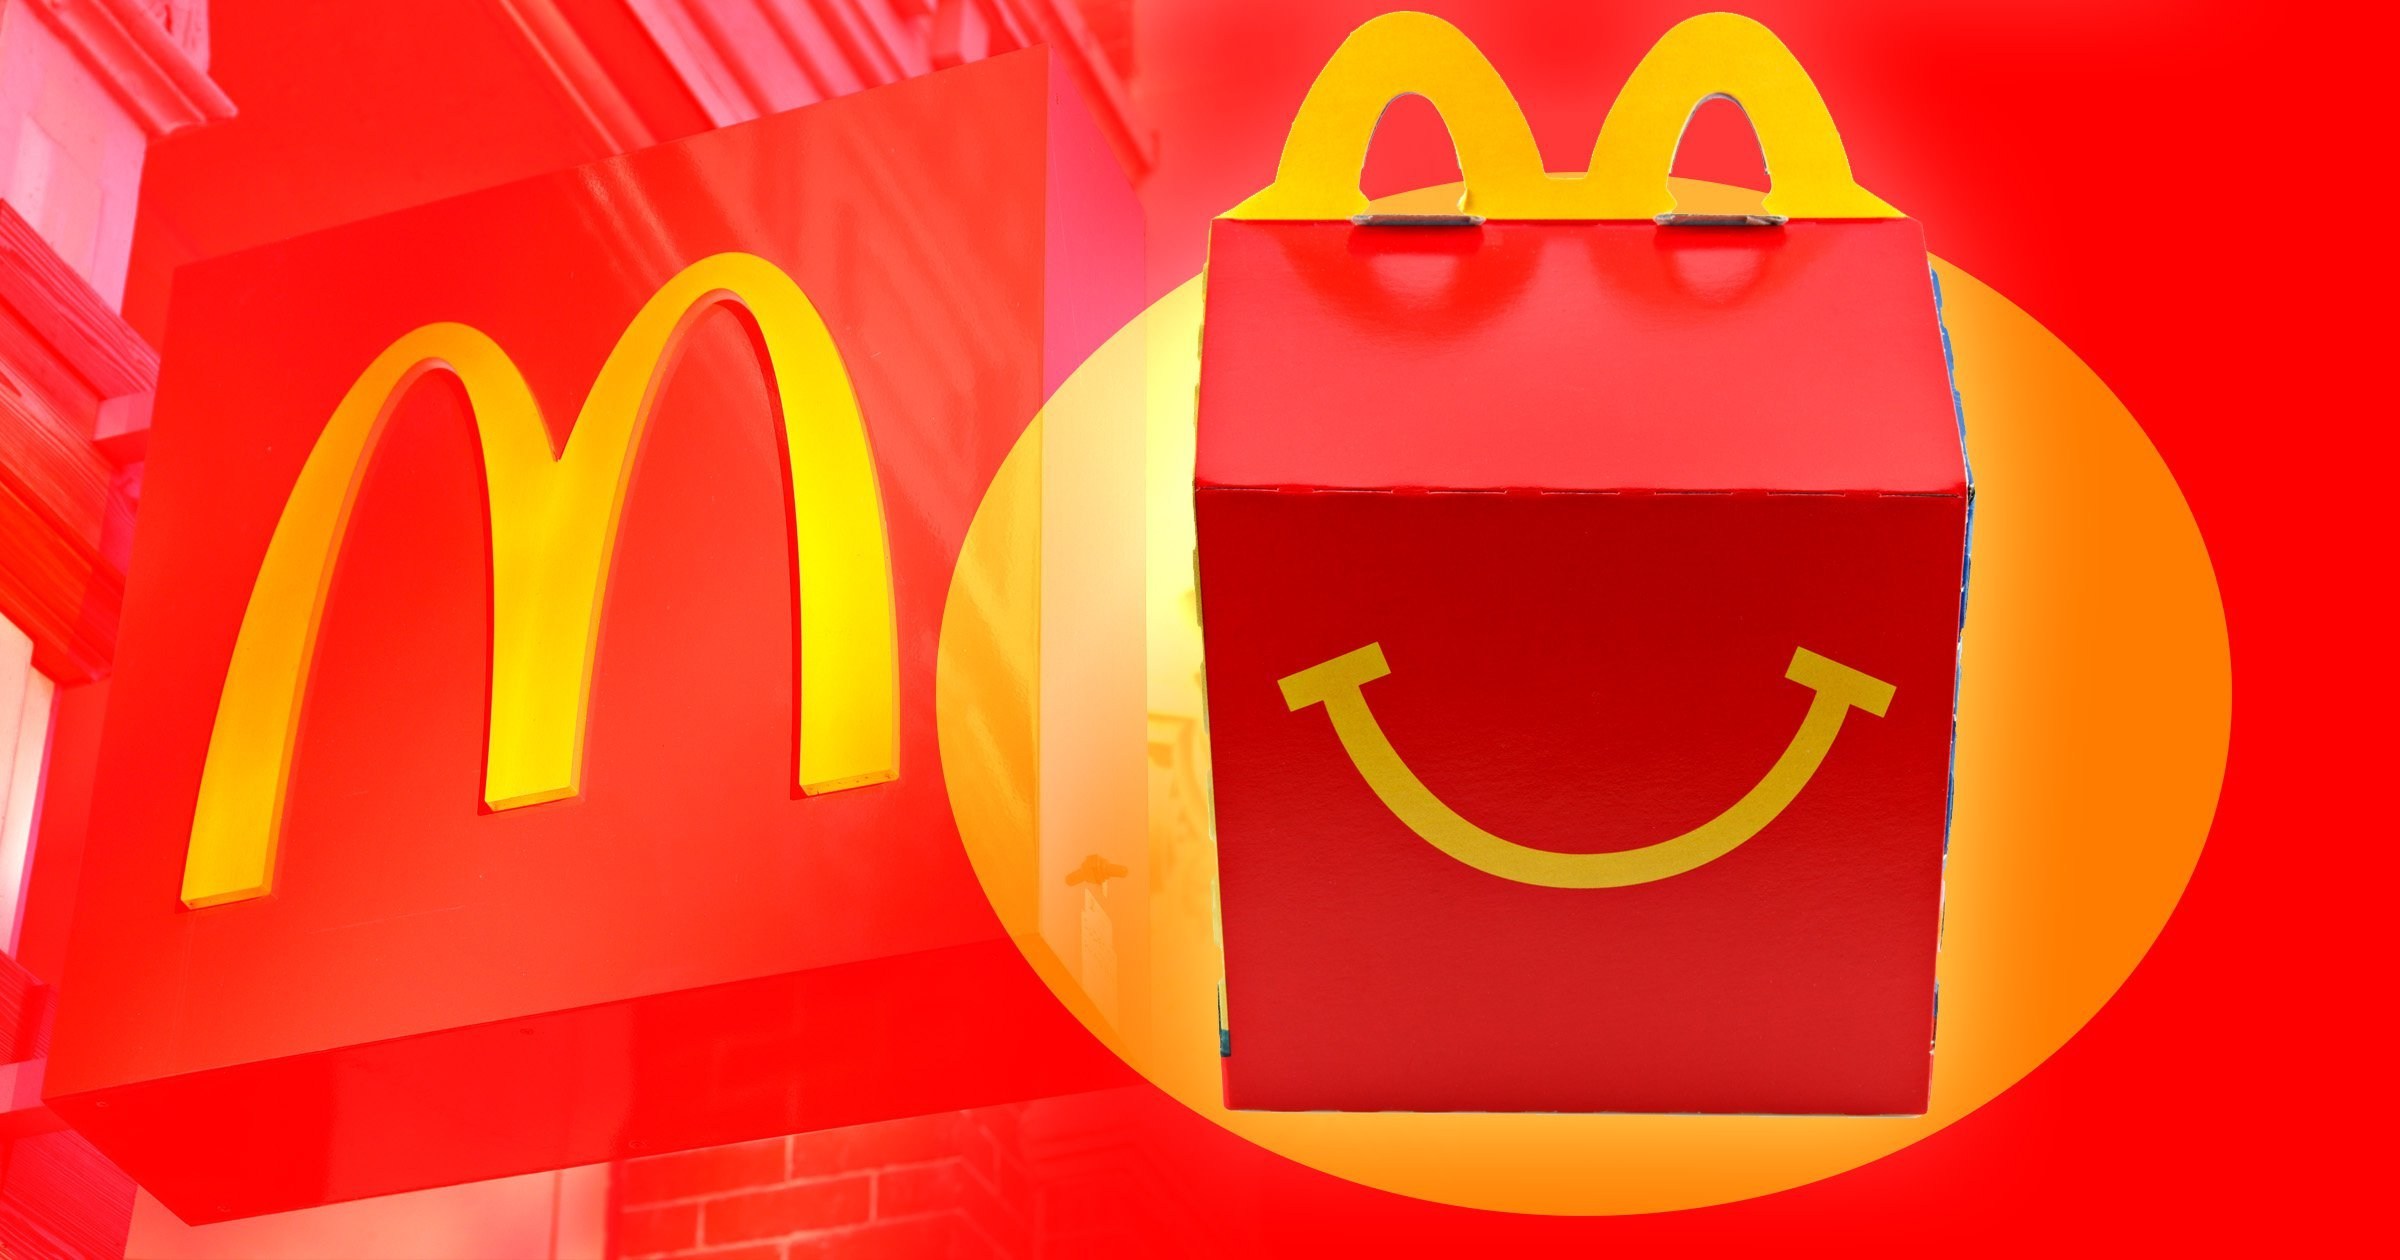 McDonald’s partners with World Book Day to give away book tokens with Happy Meals